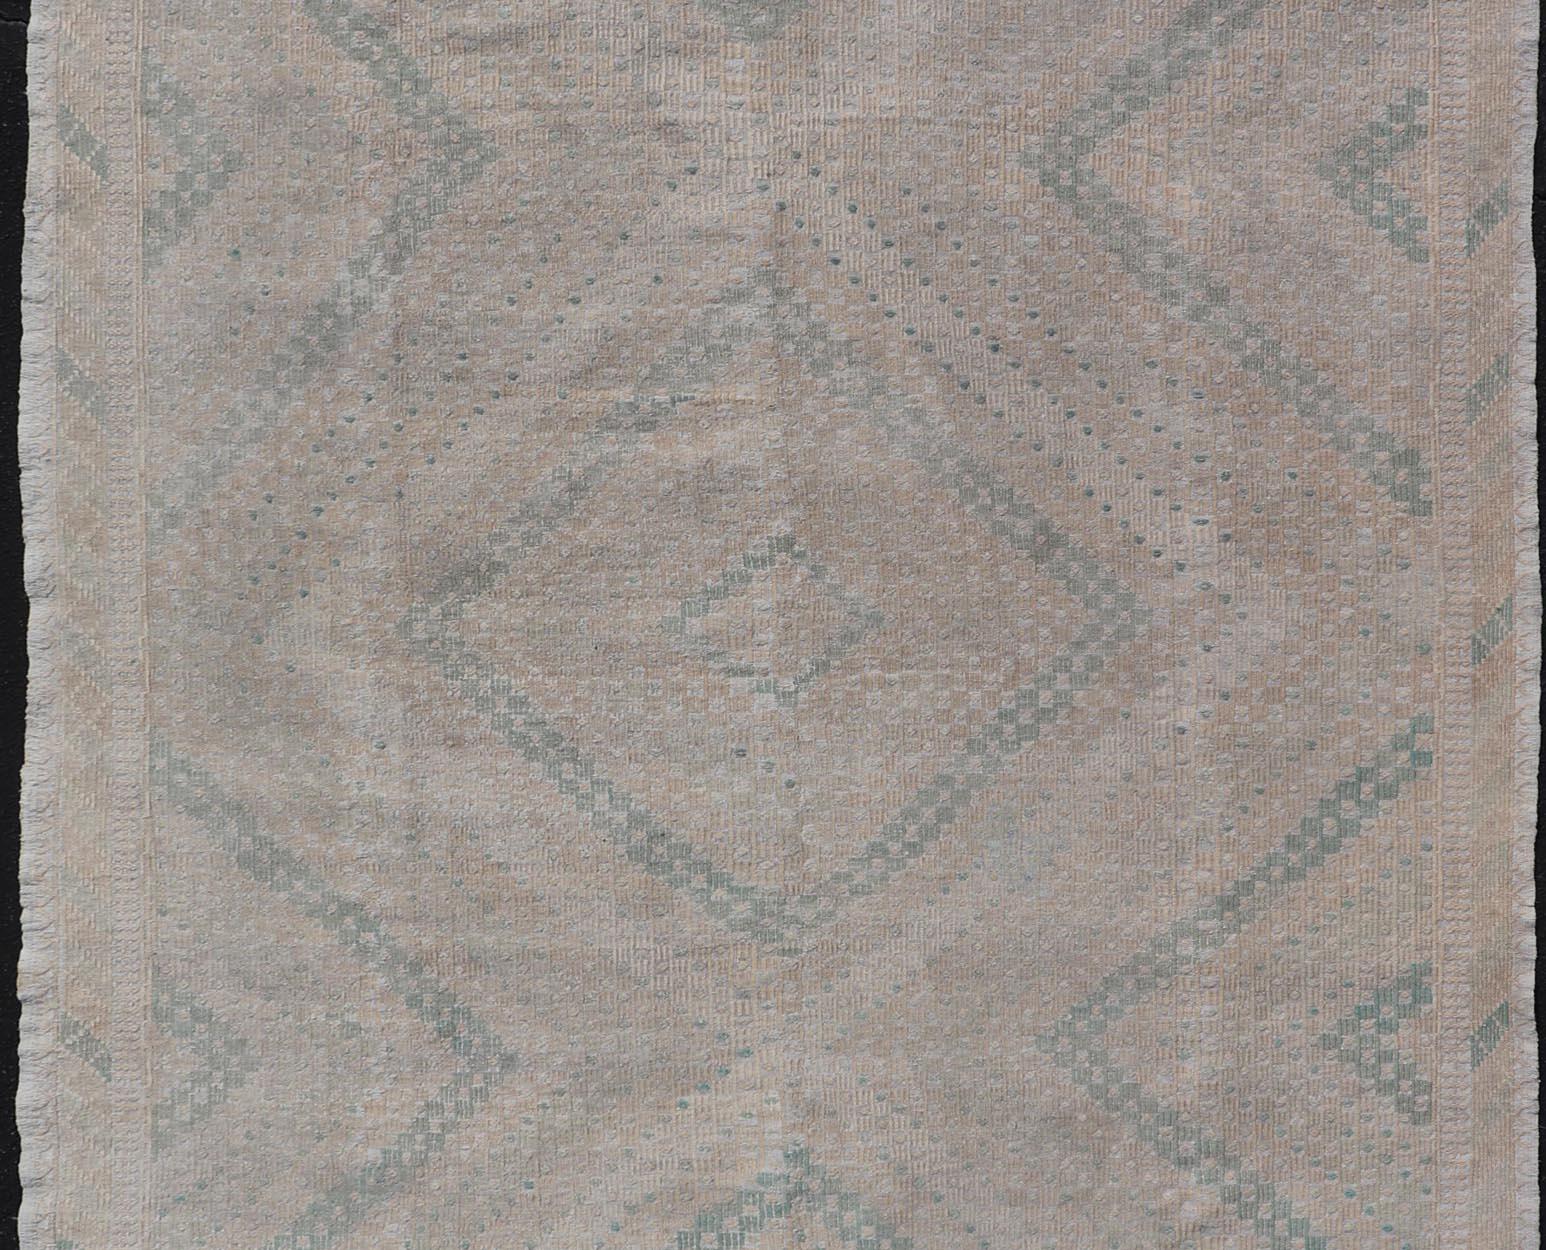 Embroidered vintage Kilim rug from Turkey in shades of tan, light green, light gray, and cream with geometric pattern, Keivan Woven Arts / rug EN-176848, country of origin / type: Turkey / Kilim, circa 1950.

Measures: 6'9 x 10'8.